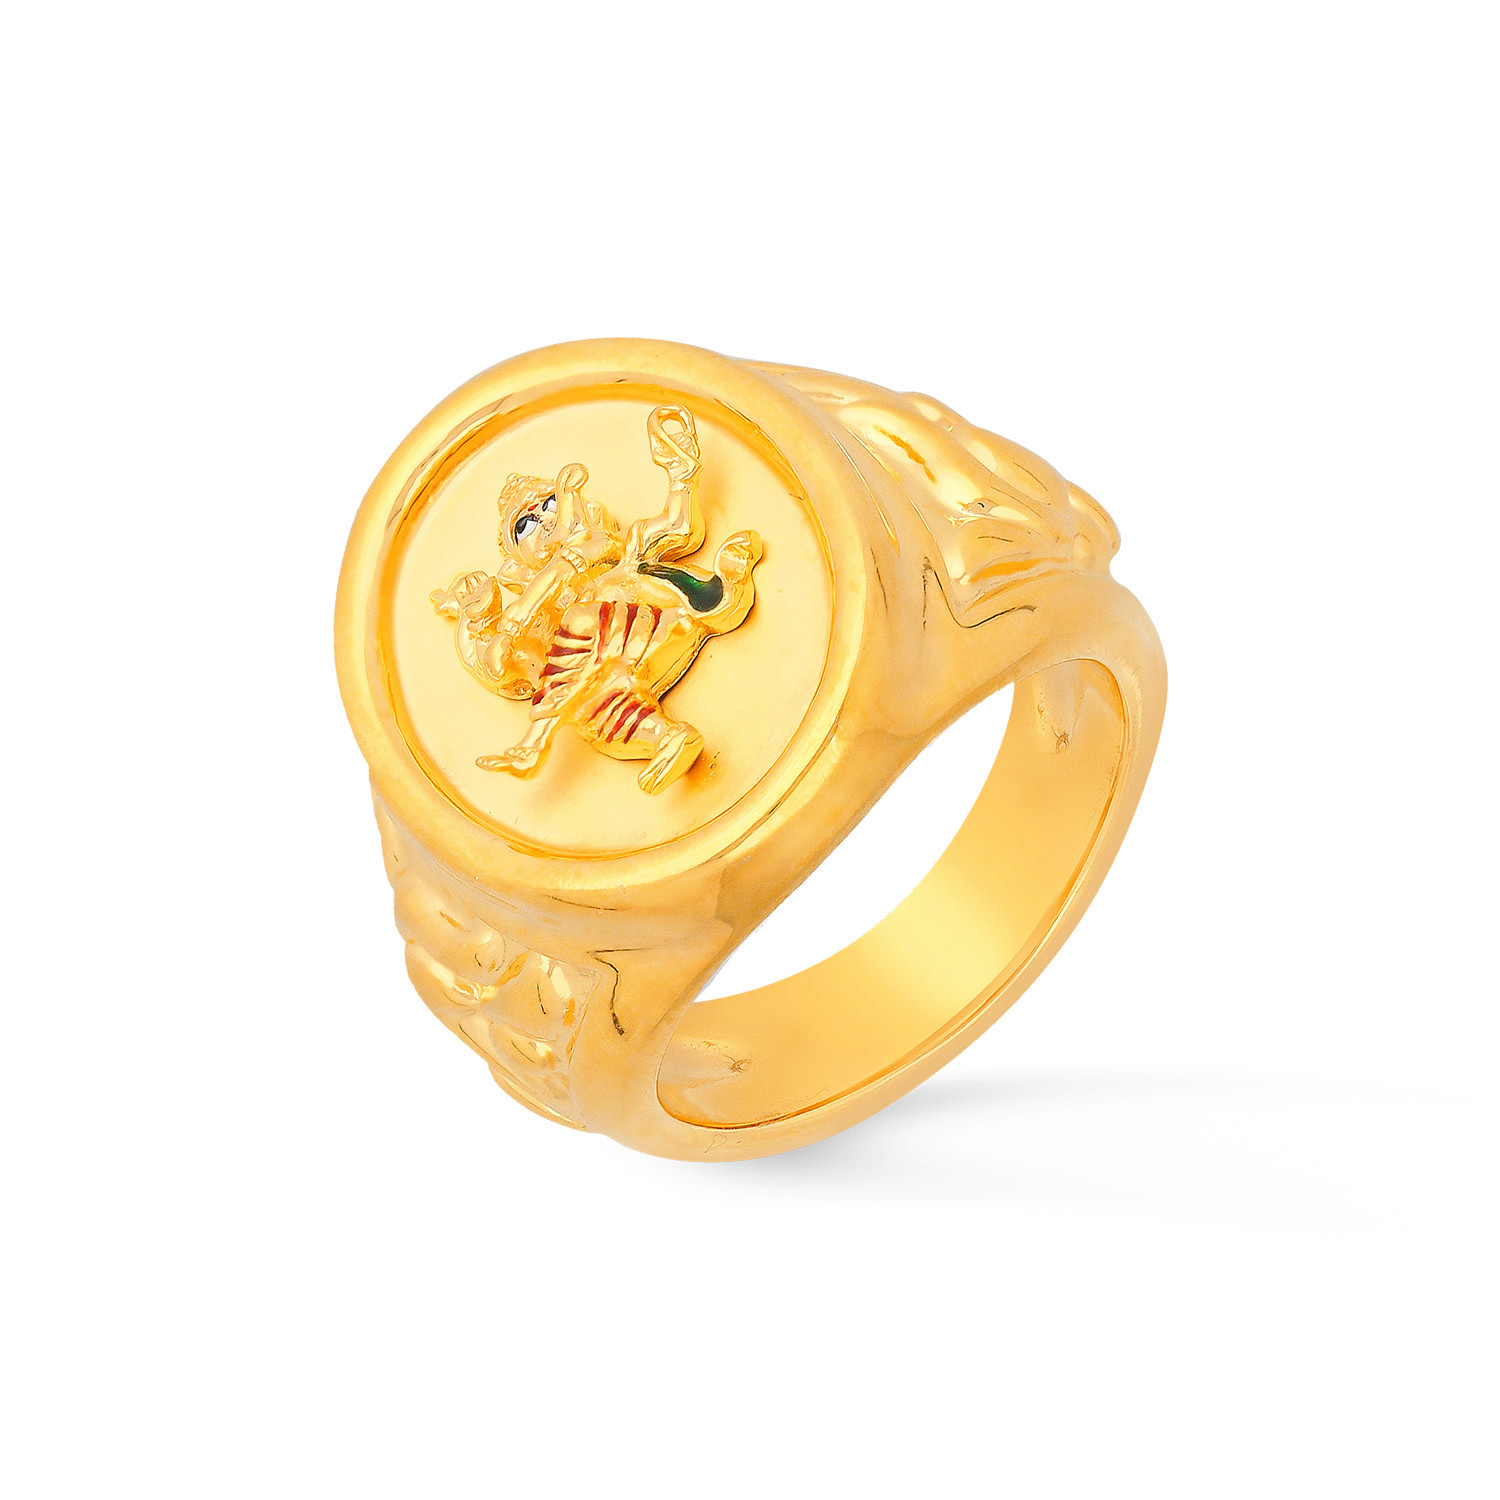 Lord Ganesh Mens Ring 22k gold - RiMs23921 - 22K Gold religious ring for  men, designed with a 3d figure of lord Ganesh on top. The ring is desig